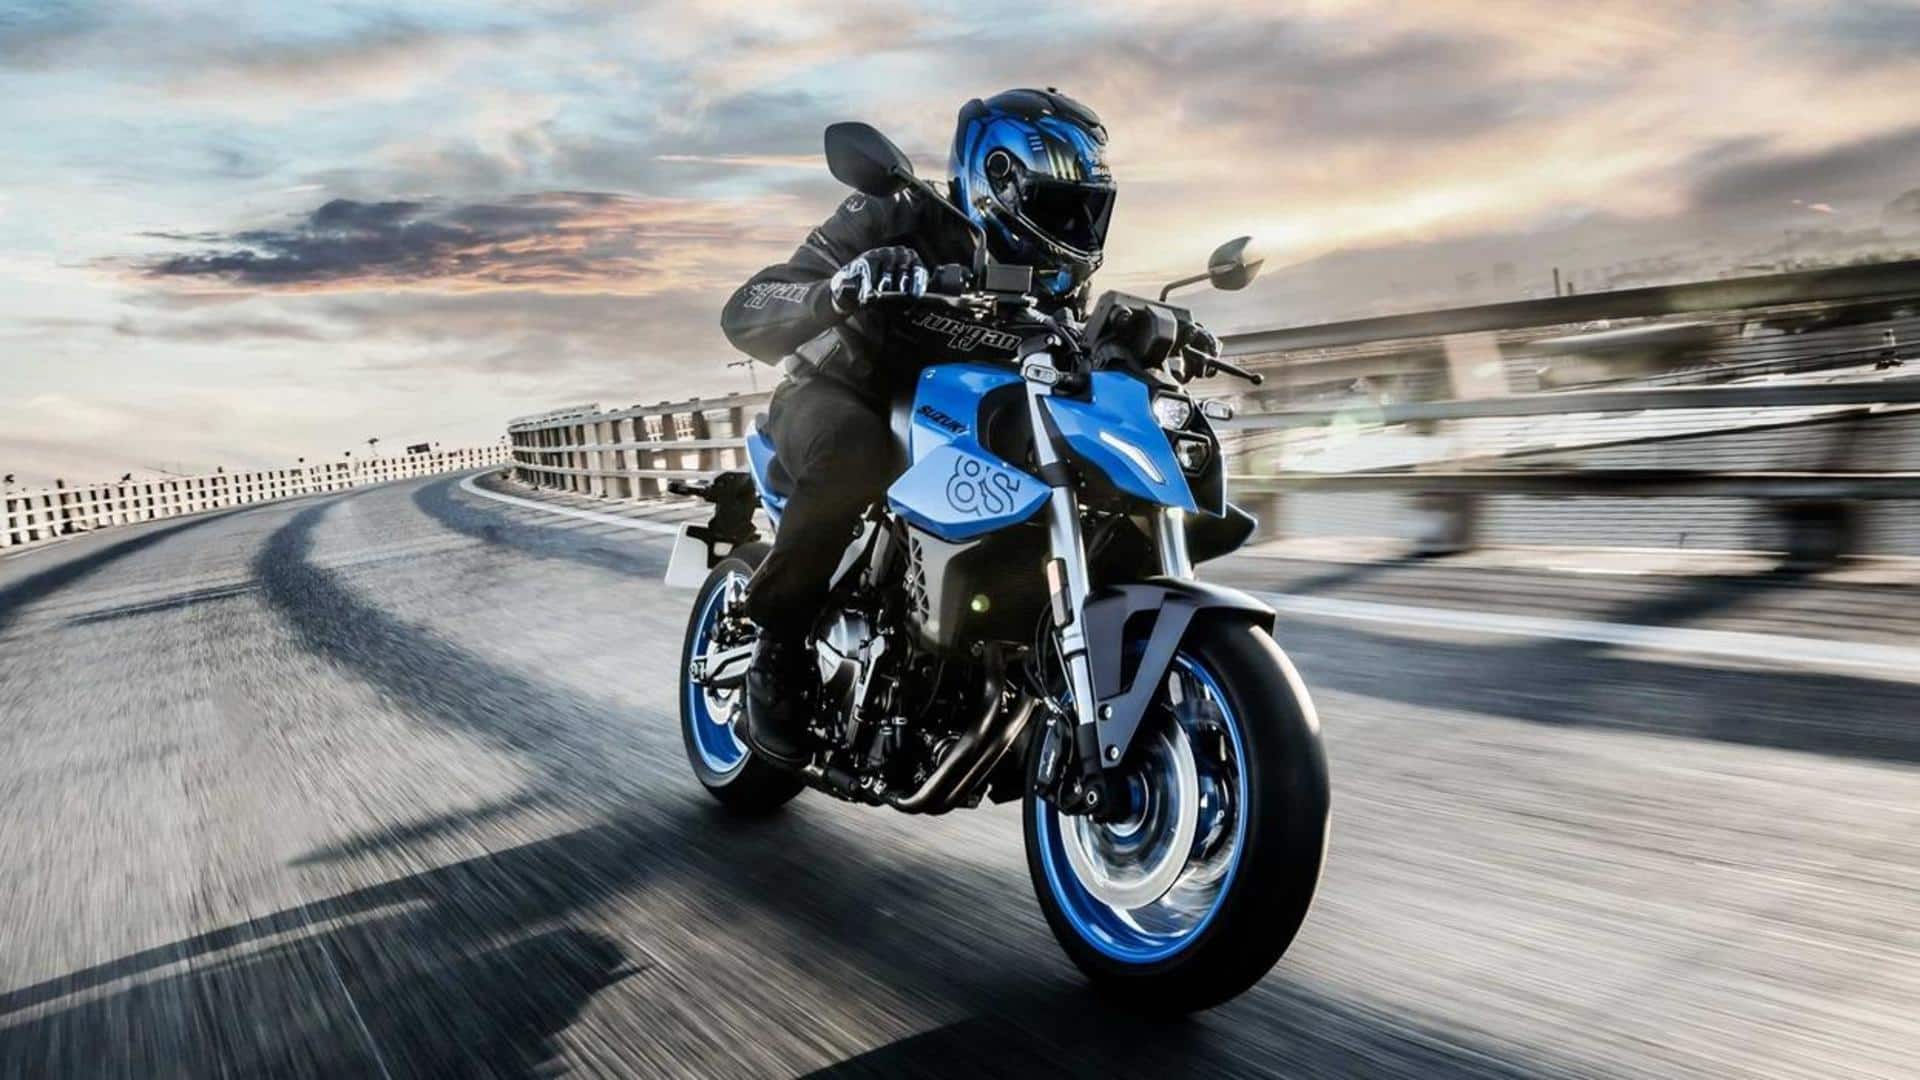 2023 Suzuki GSX-8S revealed as a radical-looking streetfighter: Check features